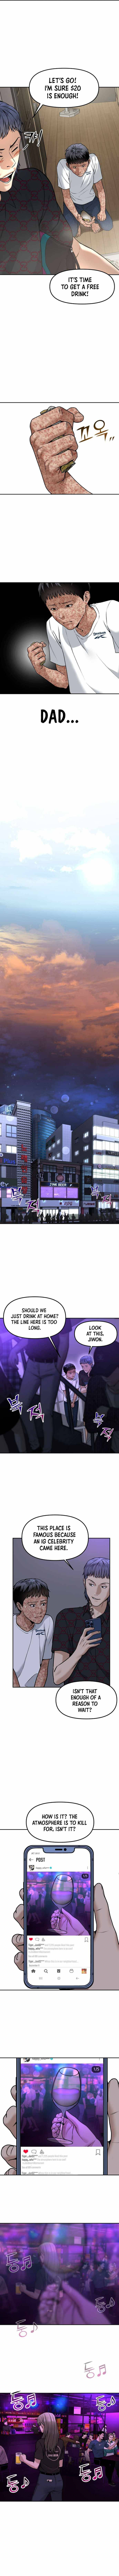 Alternate Life Chapter 1 - Page 11